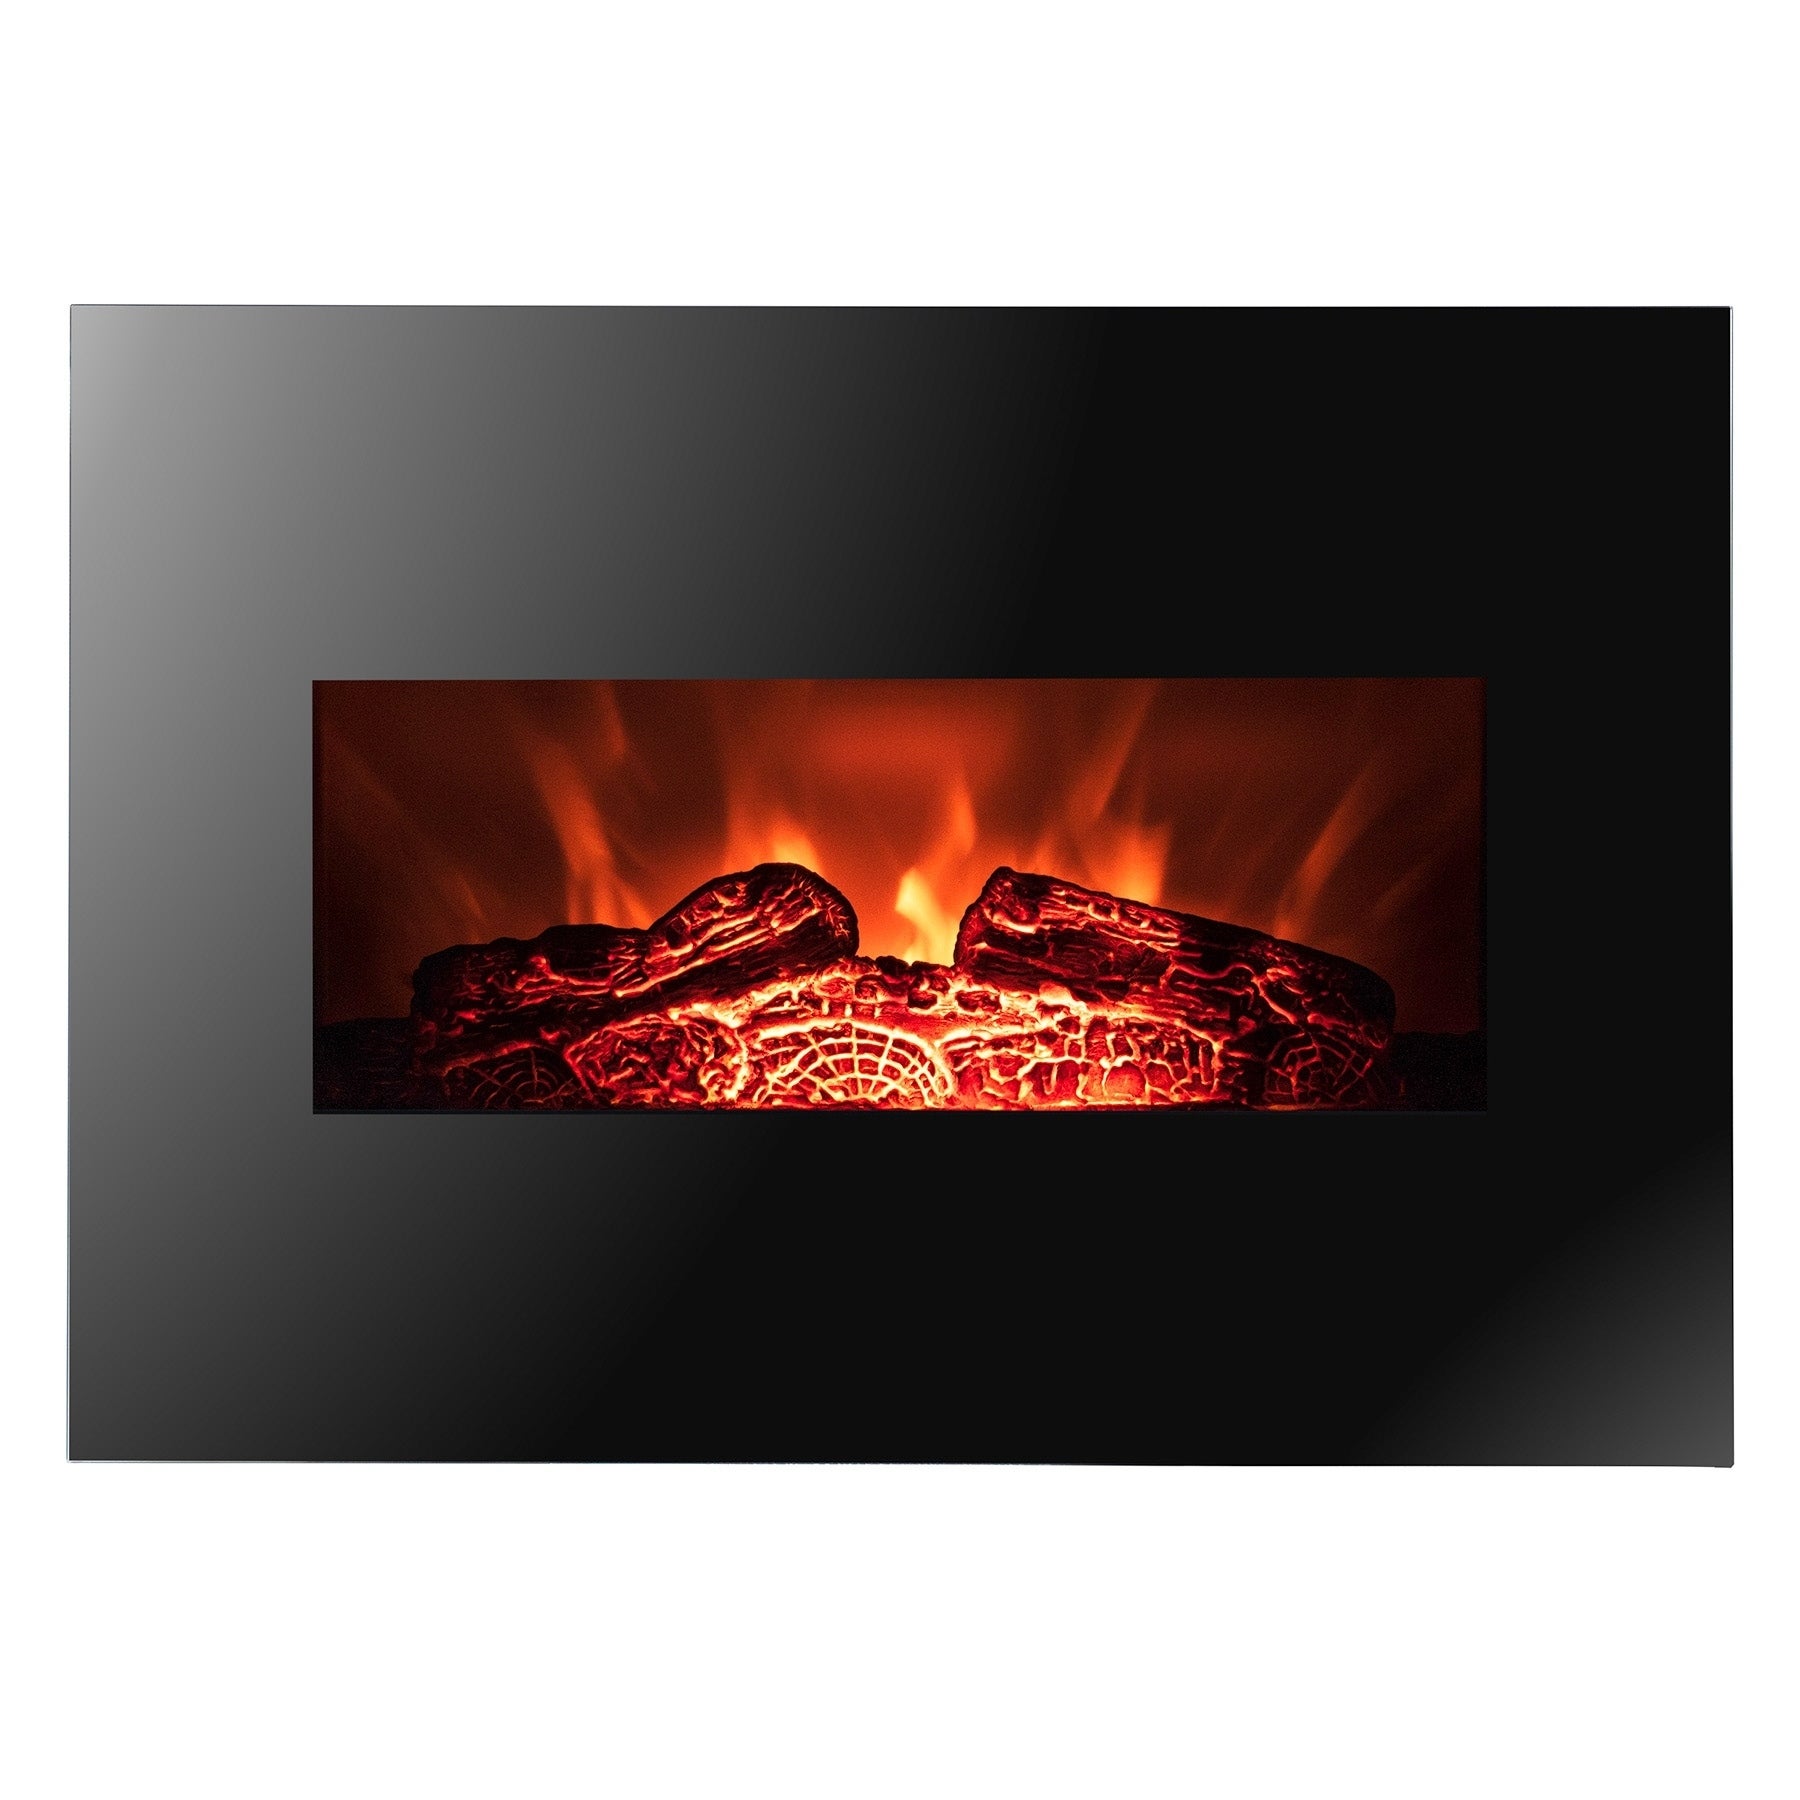 Stainless Steel Electric Fireplace Lovely Golden Vantage Fp0063 26" Wall Mount Electric Fireplace 3d Flames Firebox W Logs Heater